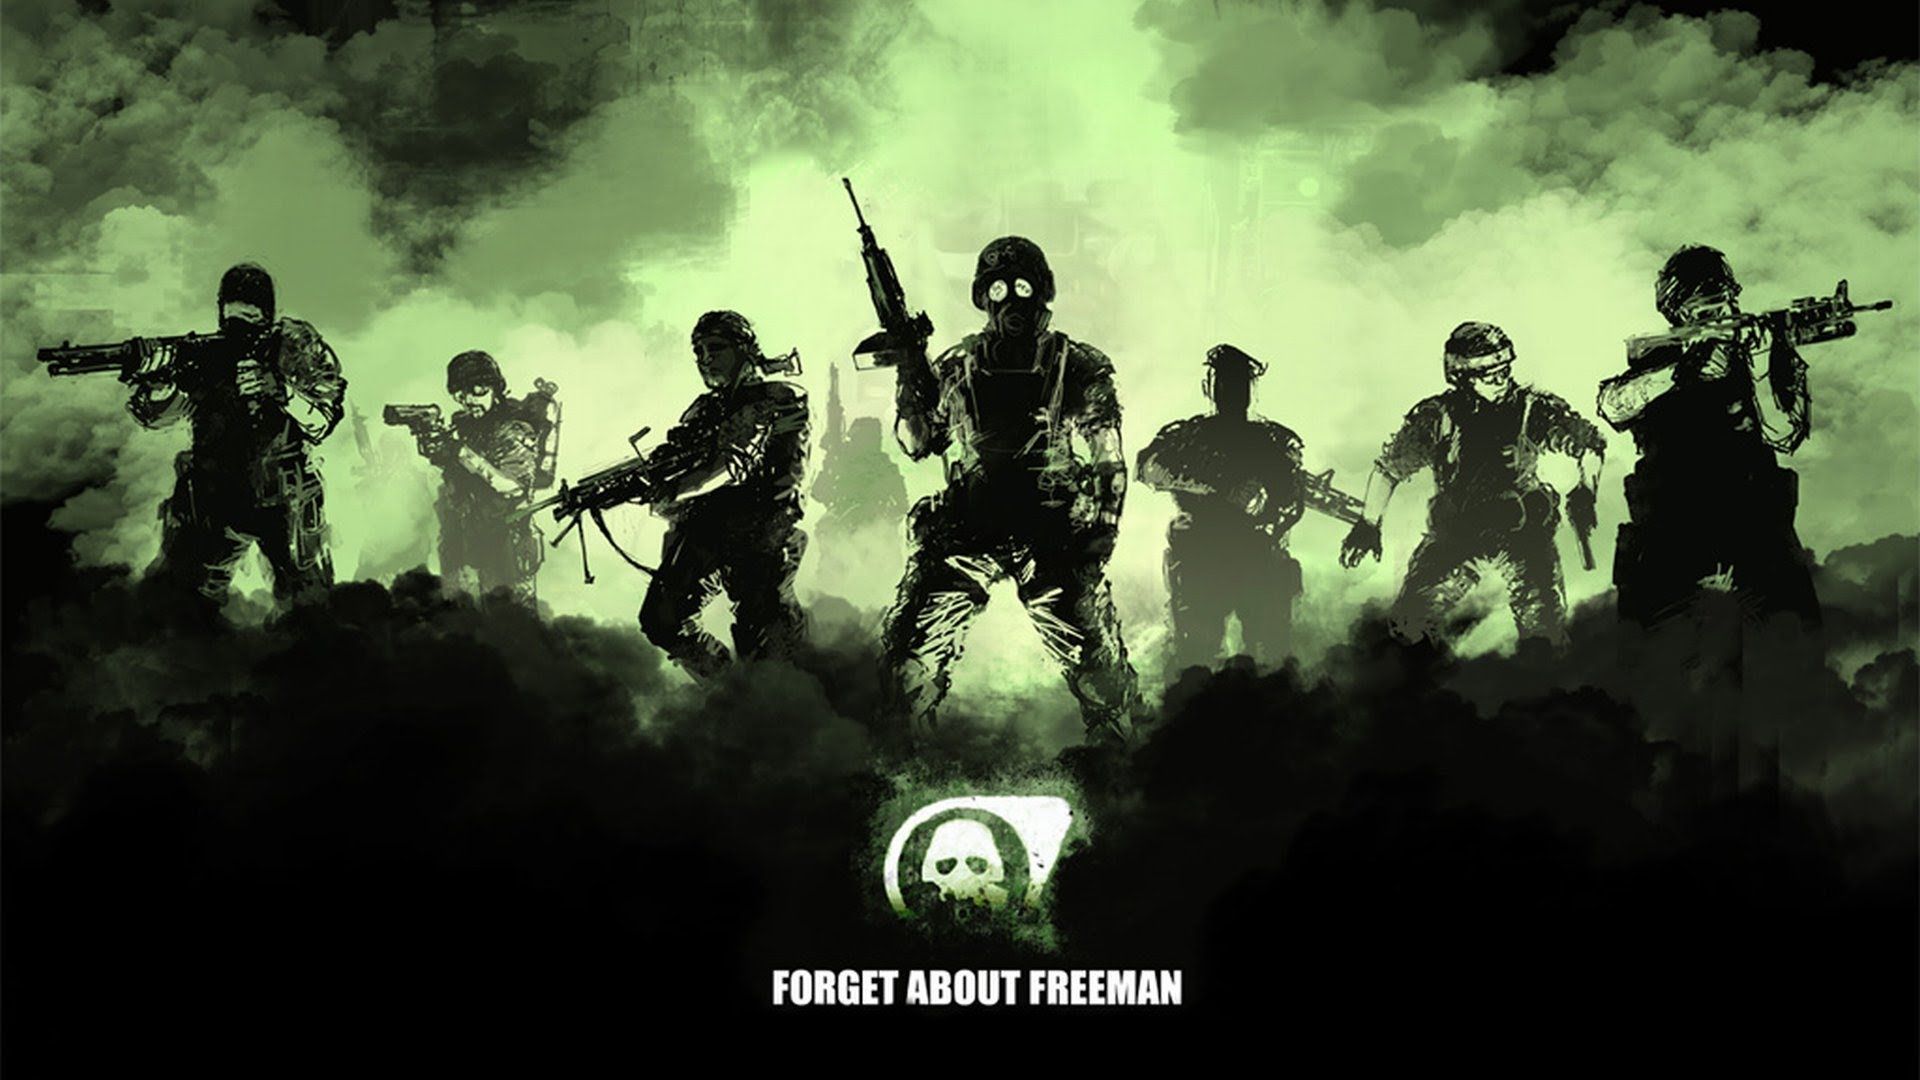 Forget About Freeman. Army wallpaper, Military wallpaper, Gaming wallpaper